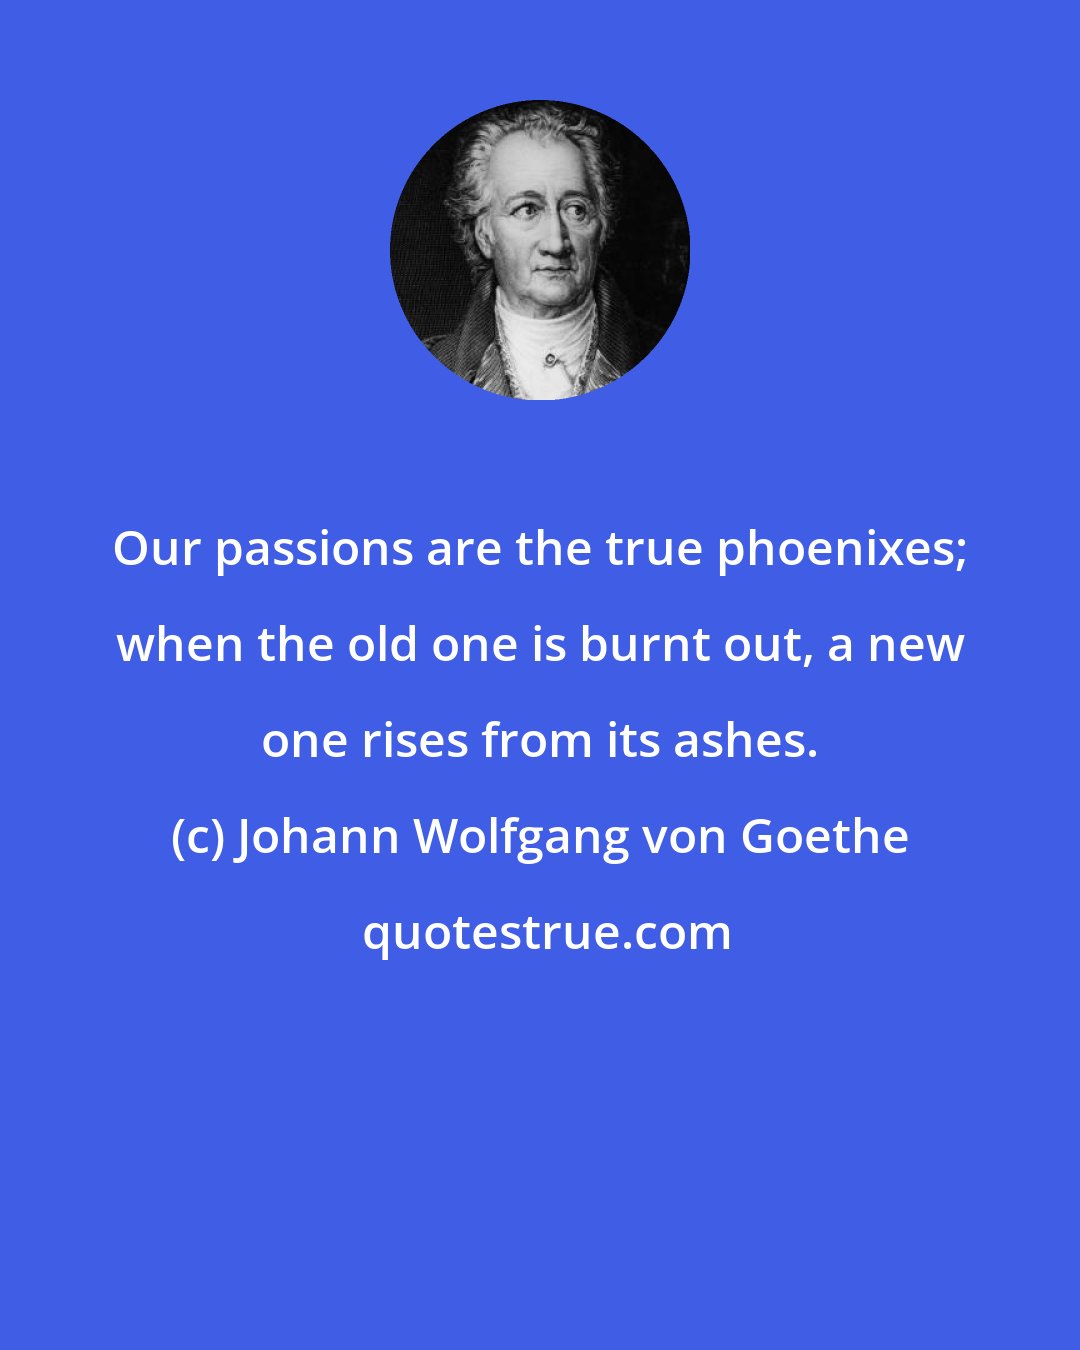 Johann Wolfgang von Goethe: Our passions are the true phoenixes; when the old one is burnt out, a new one rises from its ashes.